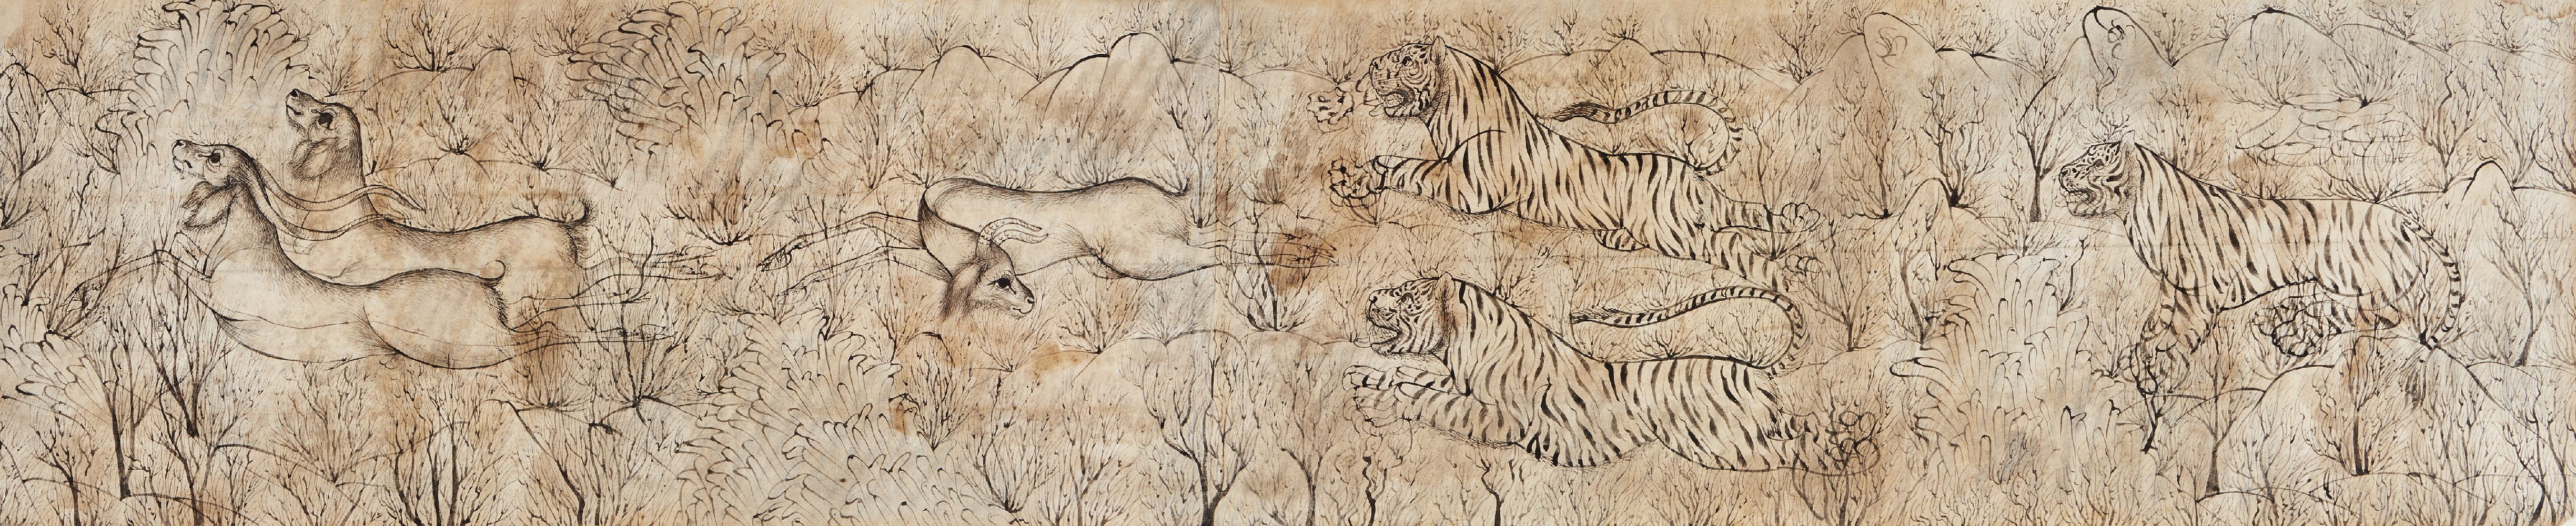 A Kotah drawing of a hunt scene in two sections, Kotah, India, 18th century, ink on paper, depicting